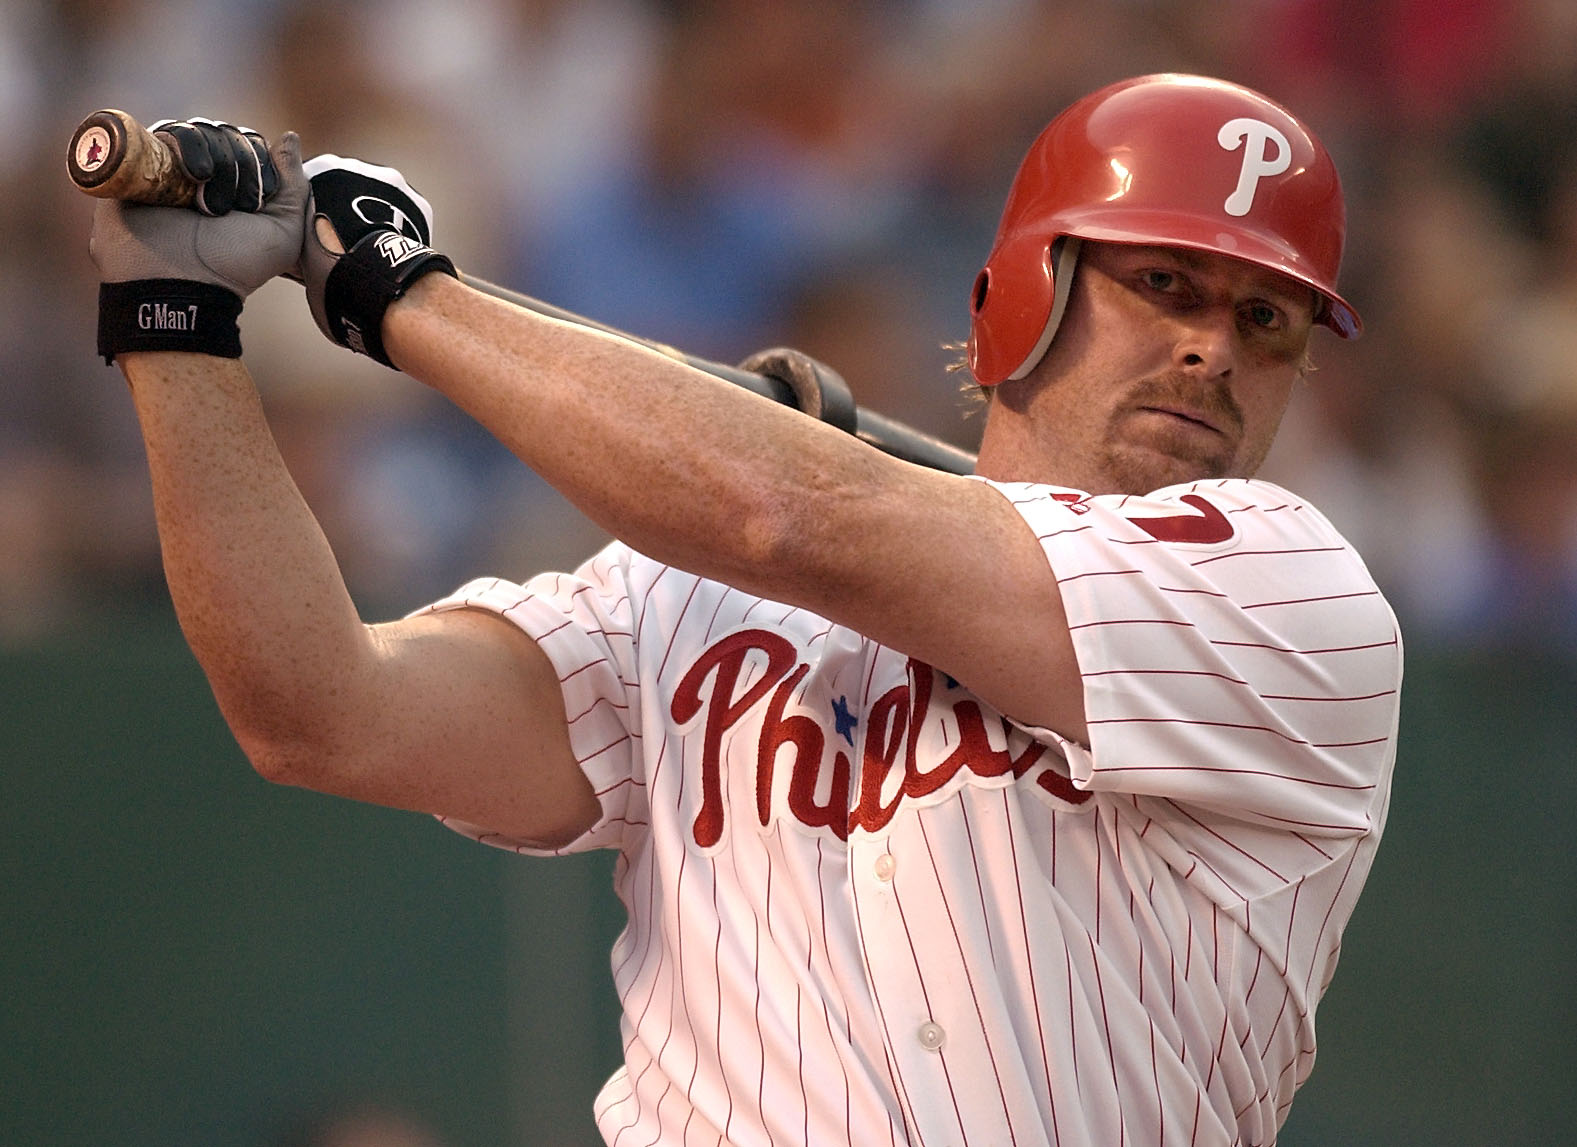 Former Royals outfielder Jeremy Giambi dead at 47